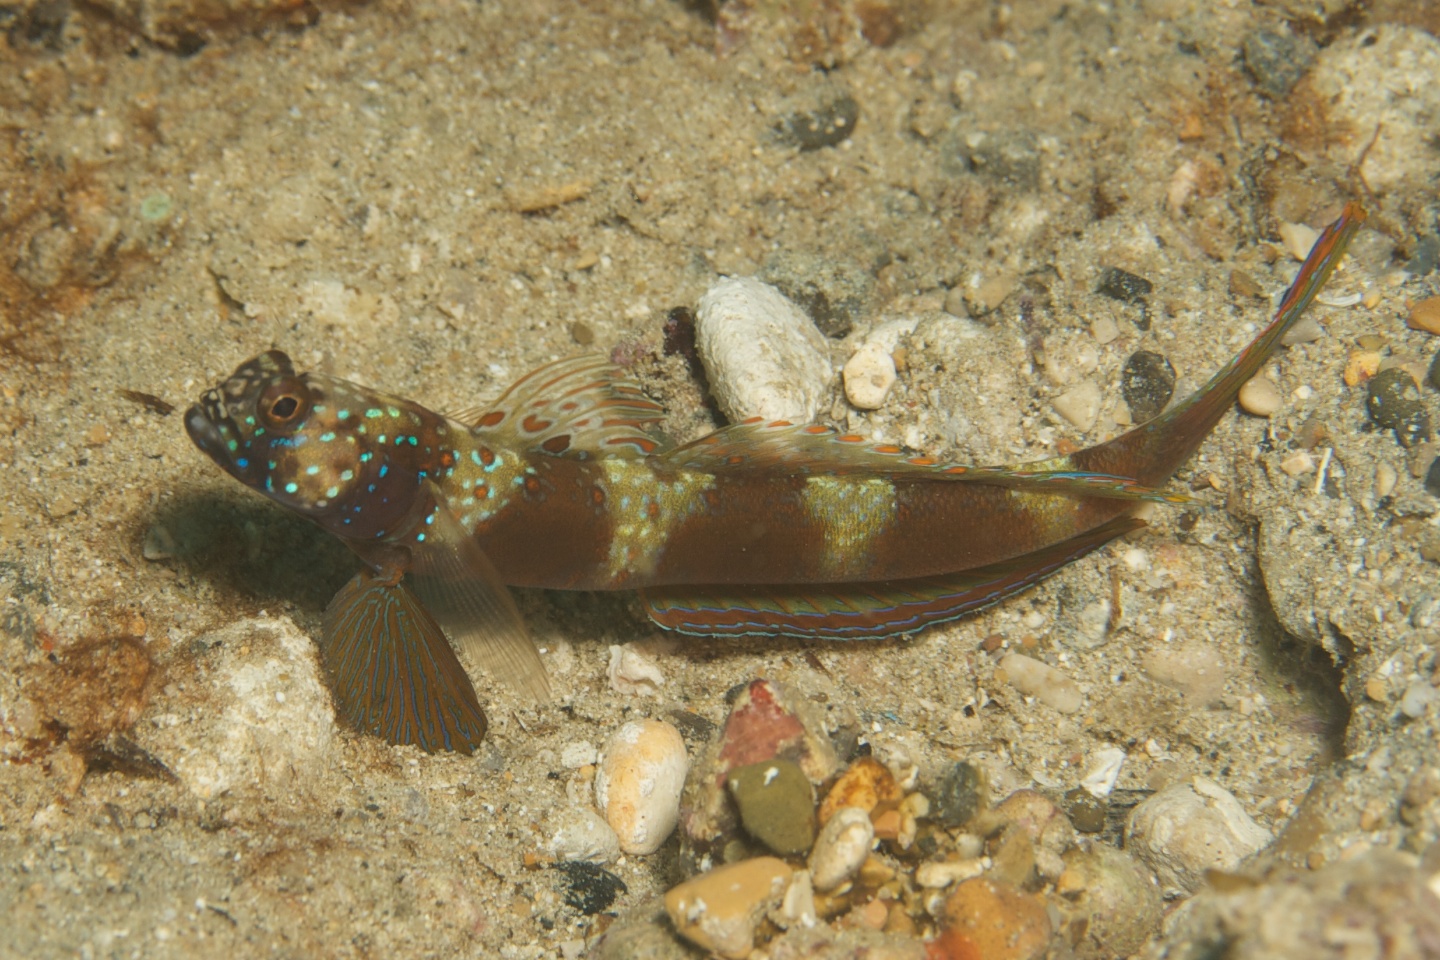 Wide-barred shrimpgoby